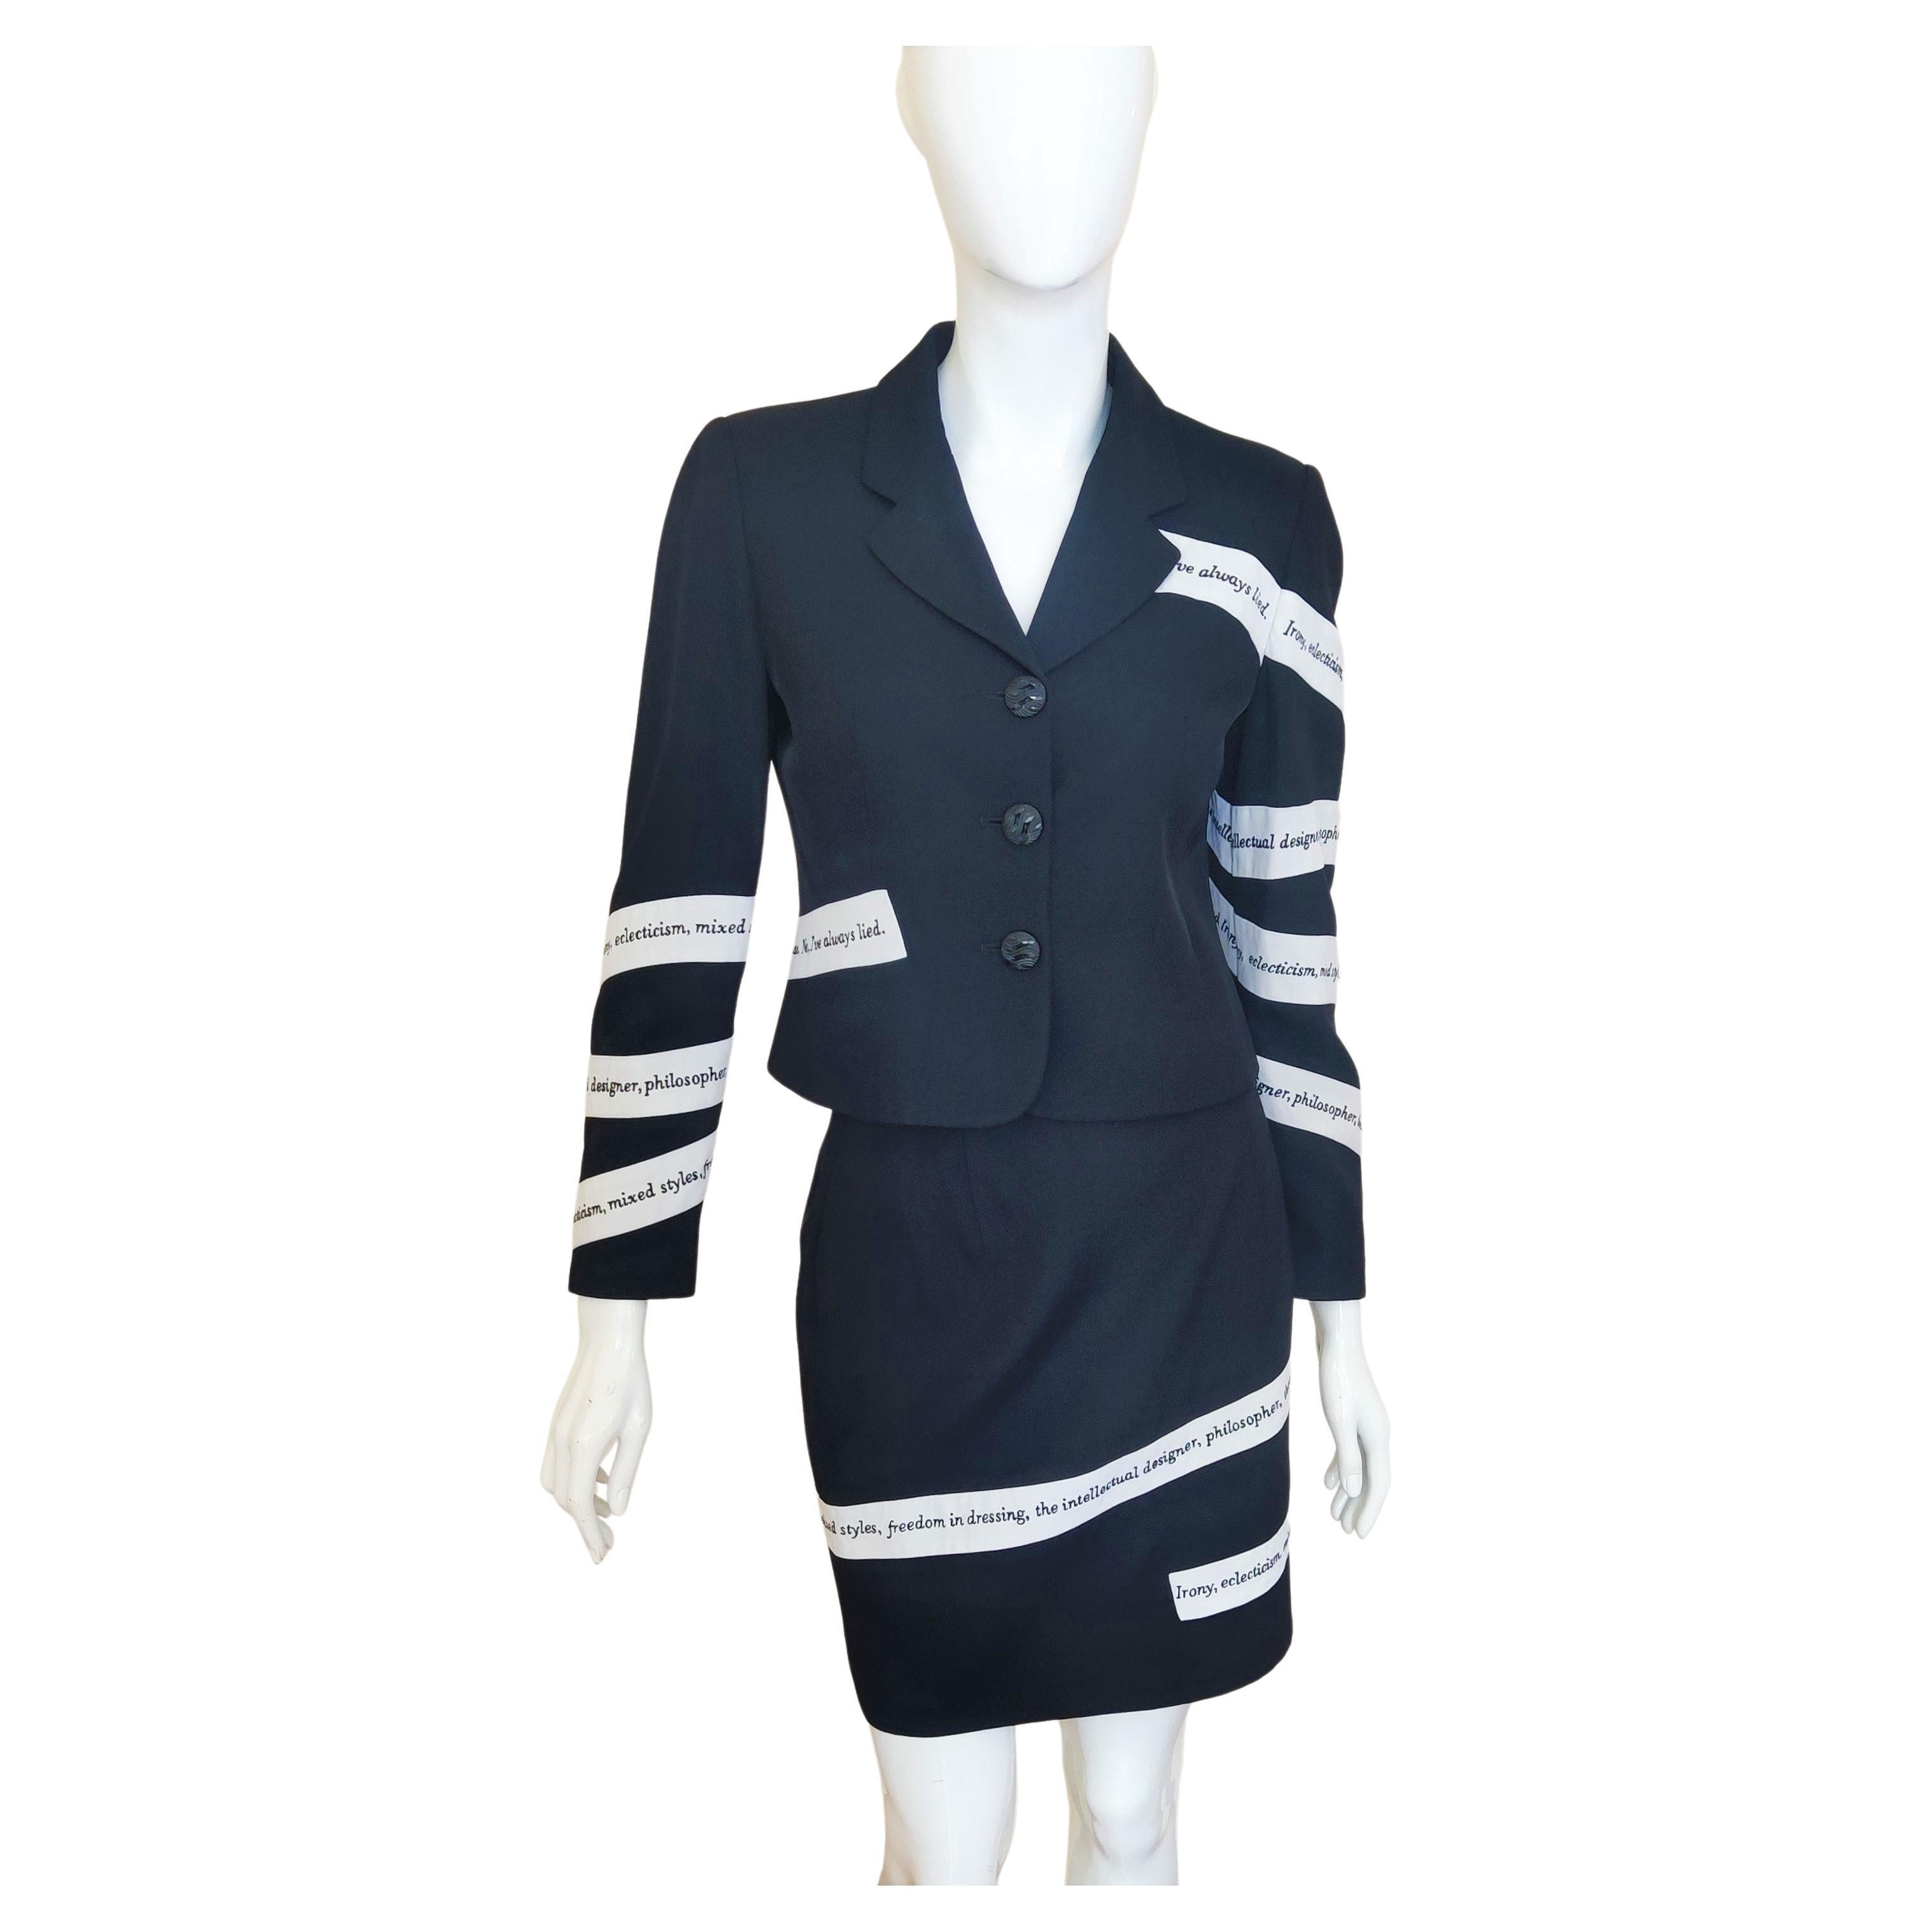 Moschino Cheap and Chic Ironies Text Tape Vintage Couture Black White Dress Suit